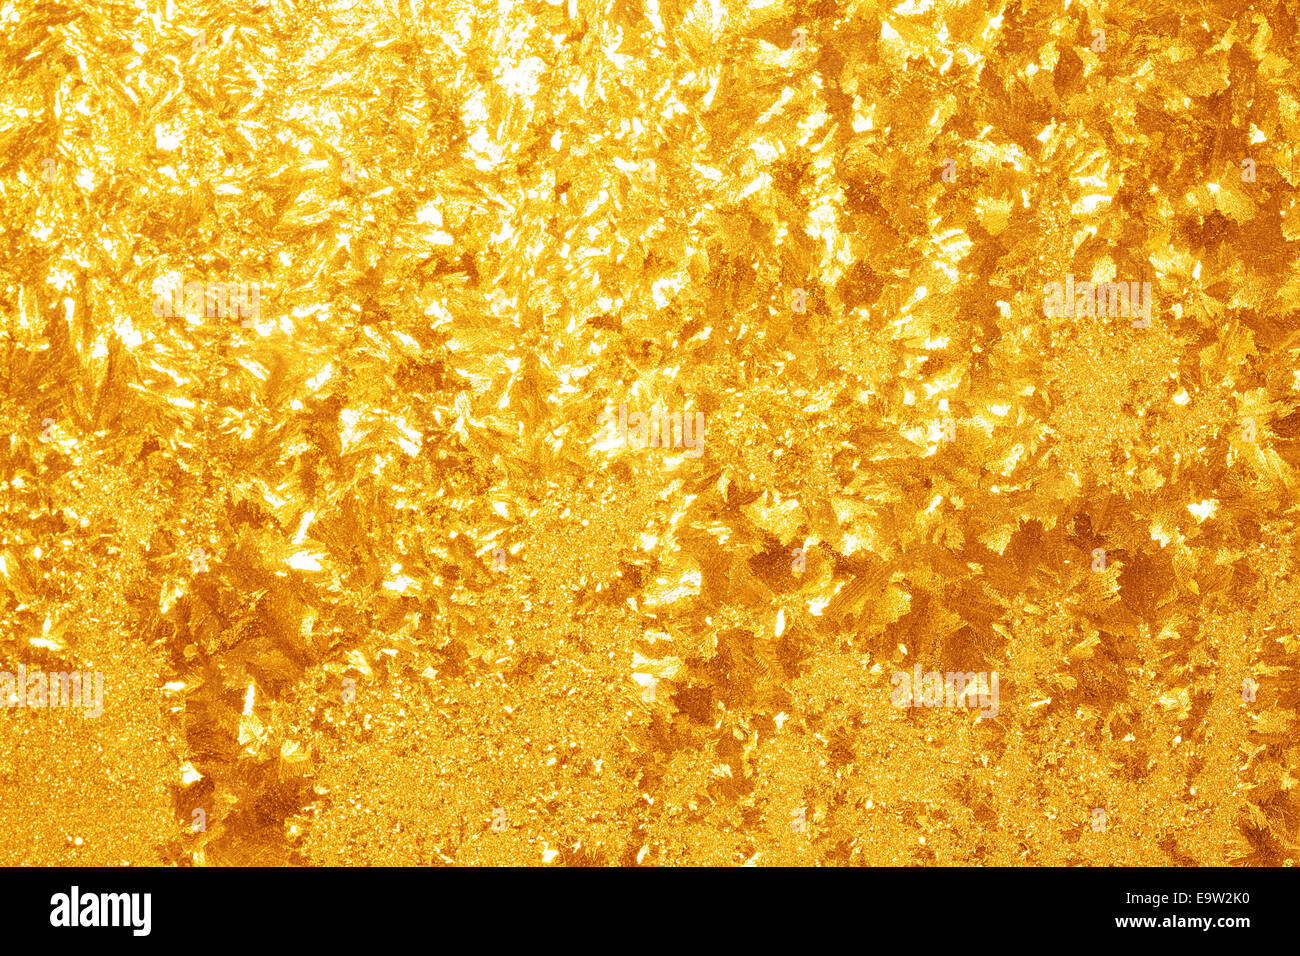 Orange Glitter Texture for Background. Low Contrast Photo. Stock Image -  Image of light, luxury: 169142415